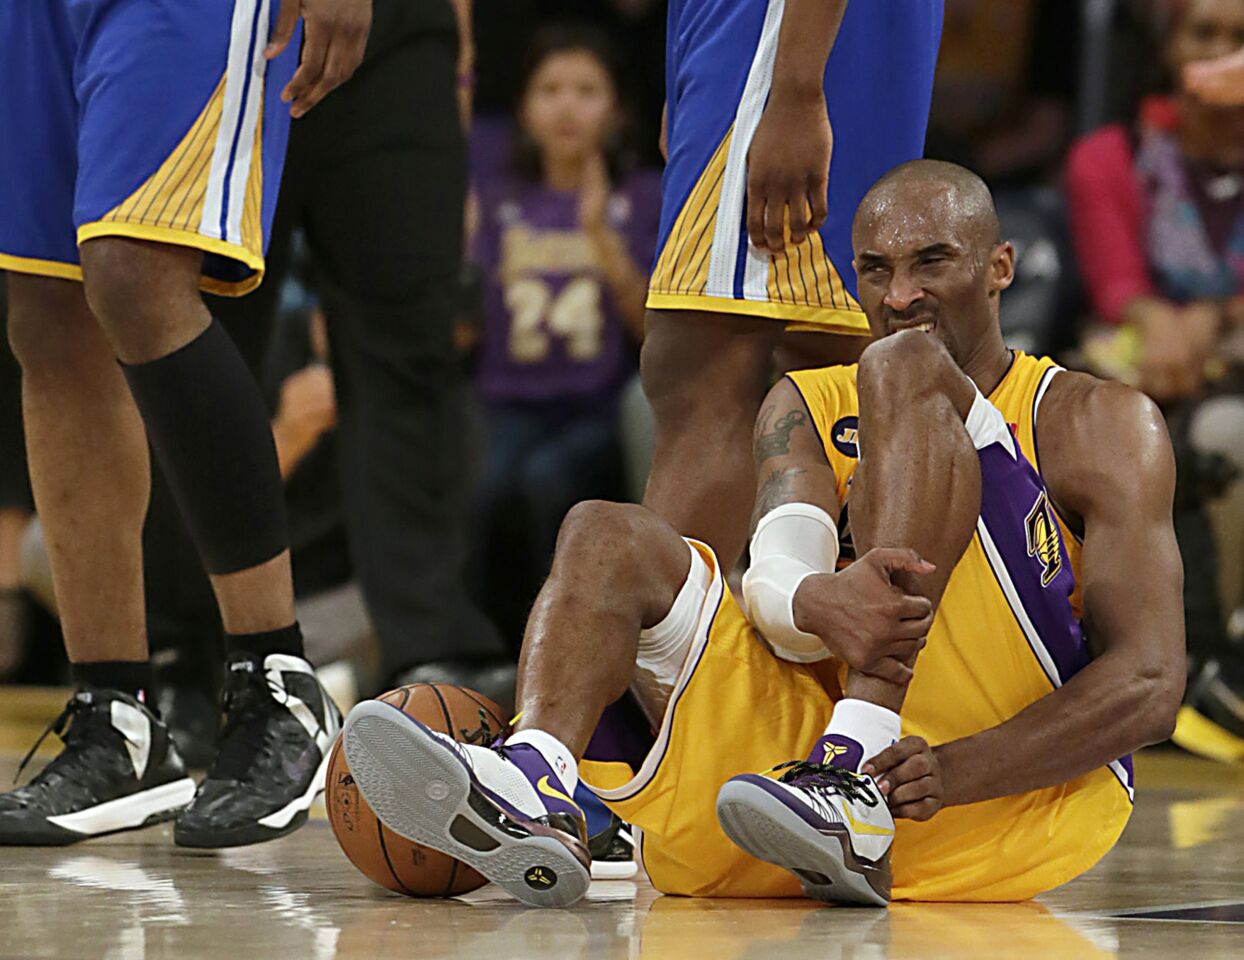 Kobe Bryant sits on the court clutching his left leg after tearing his Achilles tendon.